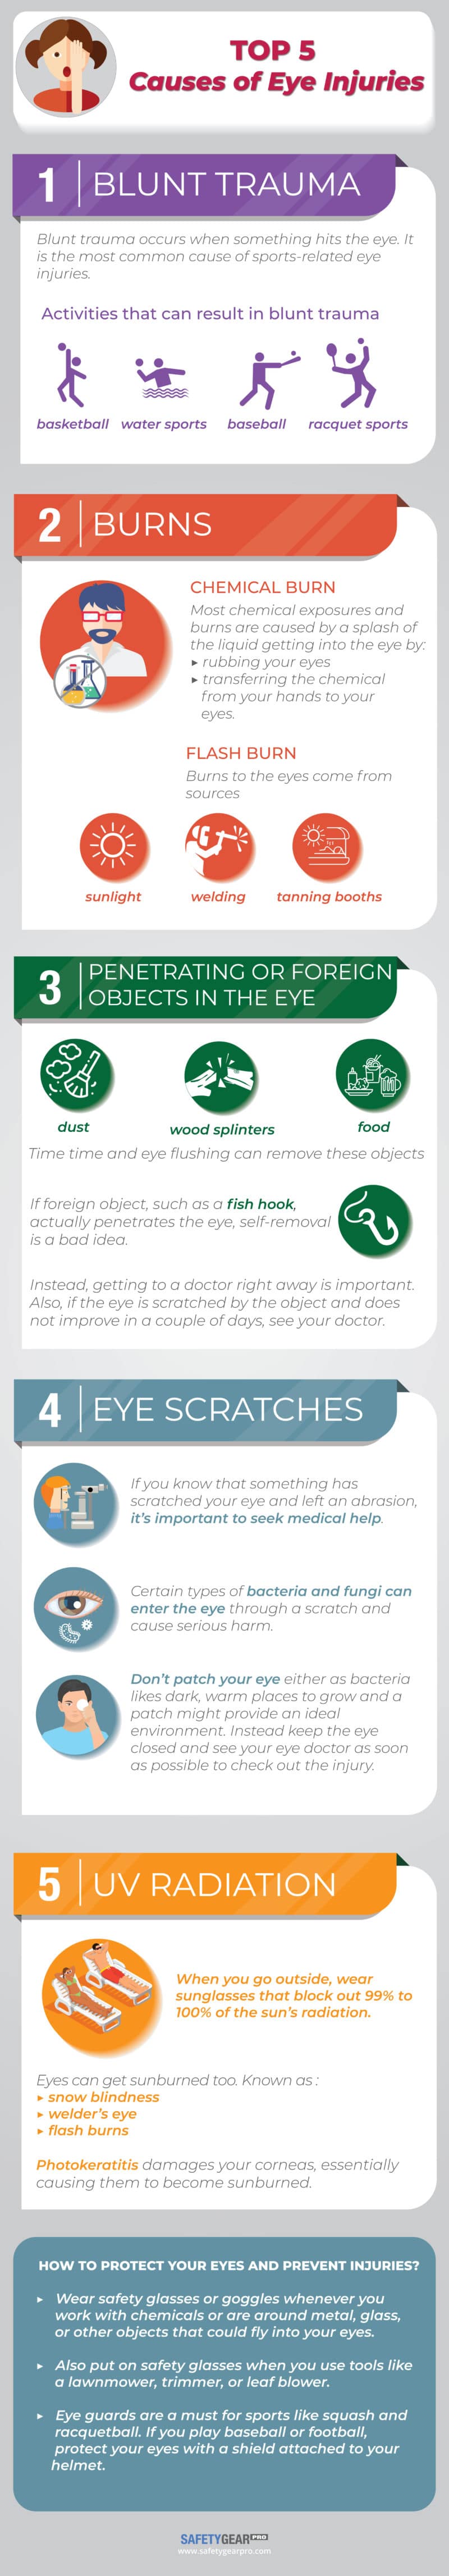 Top 5 Eye Injuries: How to Identify and Prevent Them | Safety Gear Pro